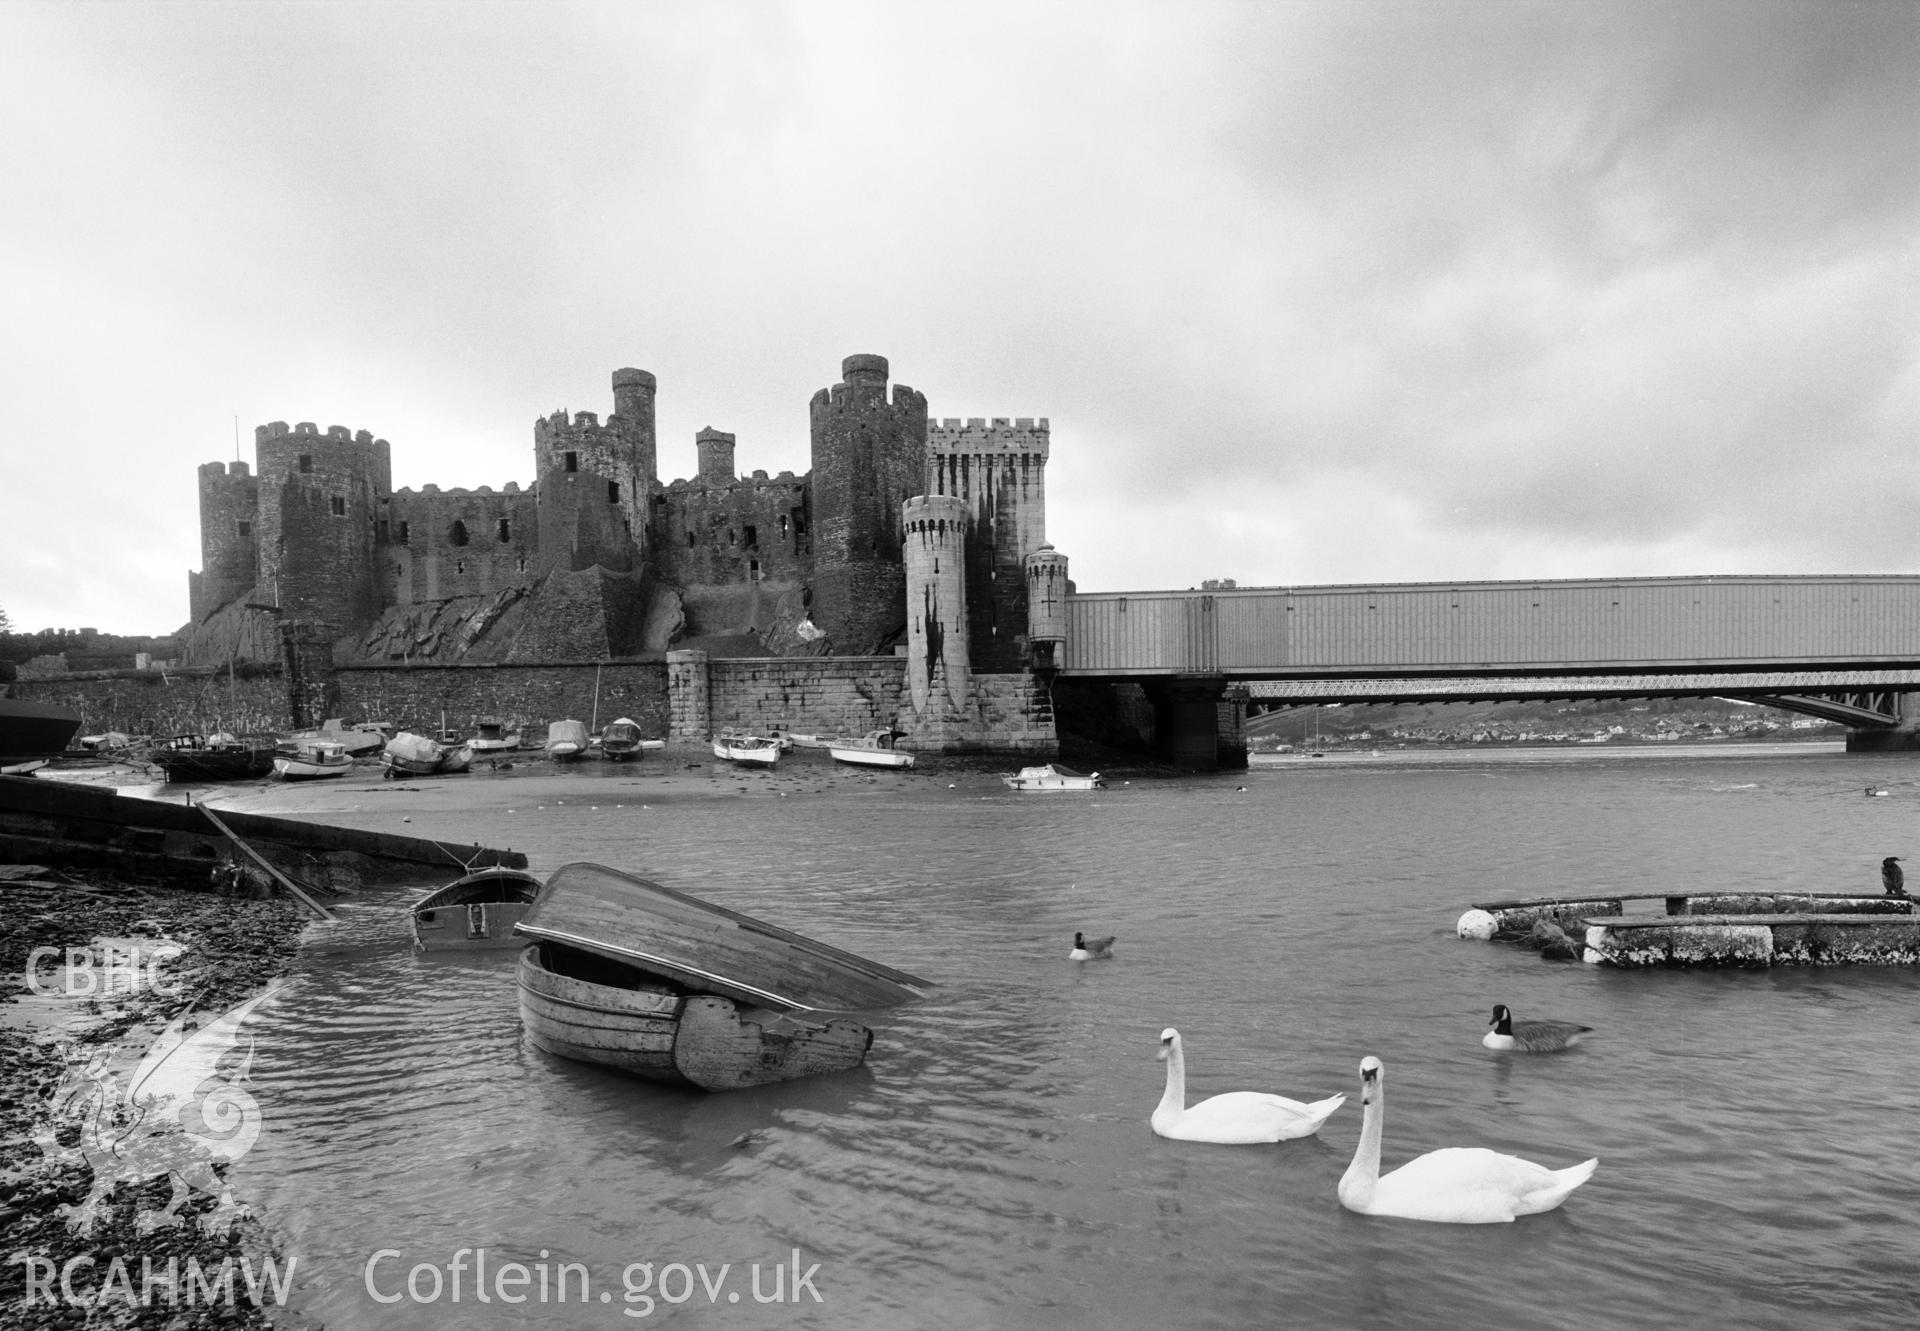 Photographic negative showing view of Conwy Castle with swans; collated by the former Central Office of Information.